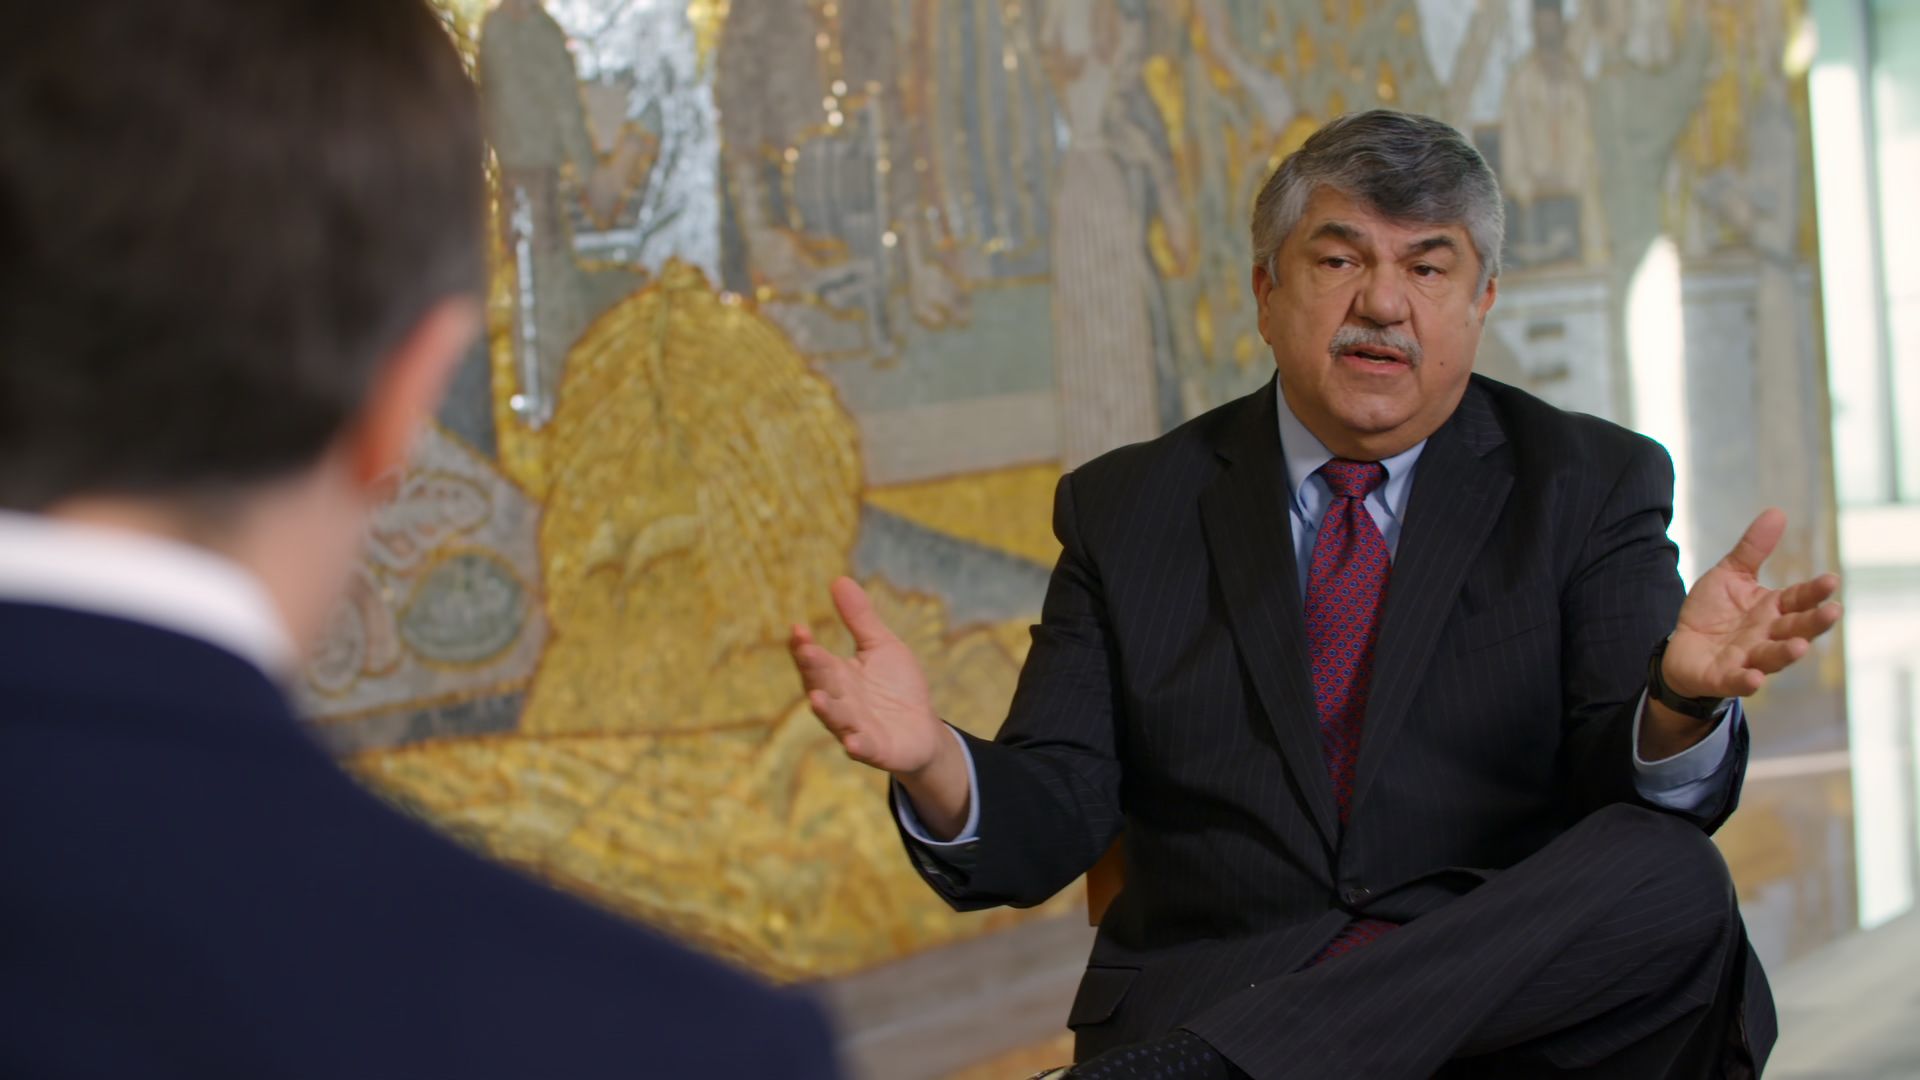 AFL-CIO President Richard Trumka is seen speaking during an interview for 